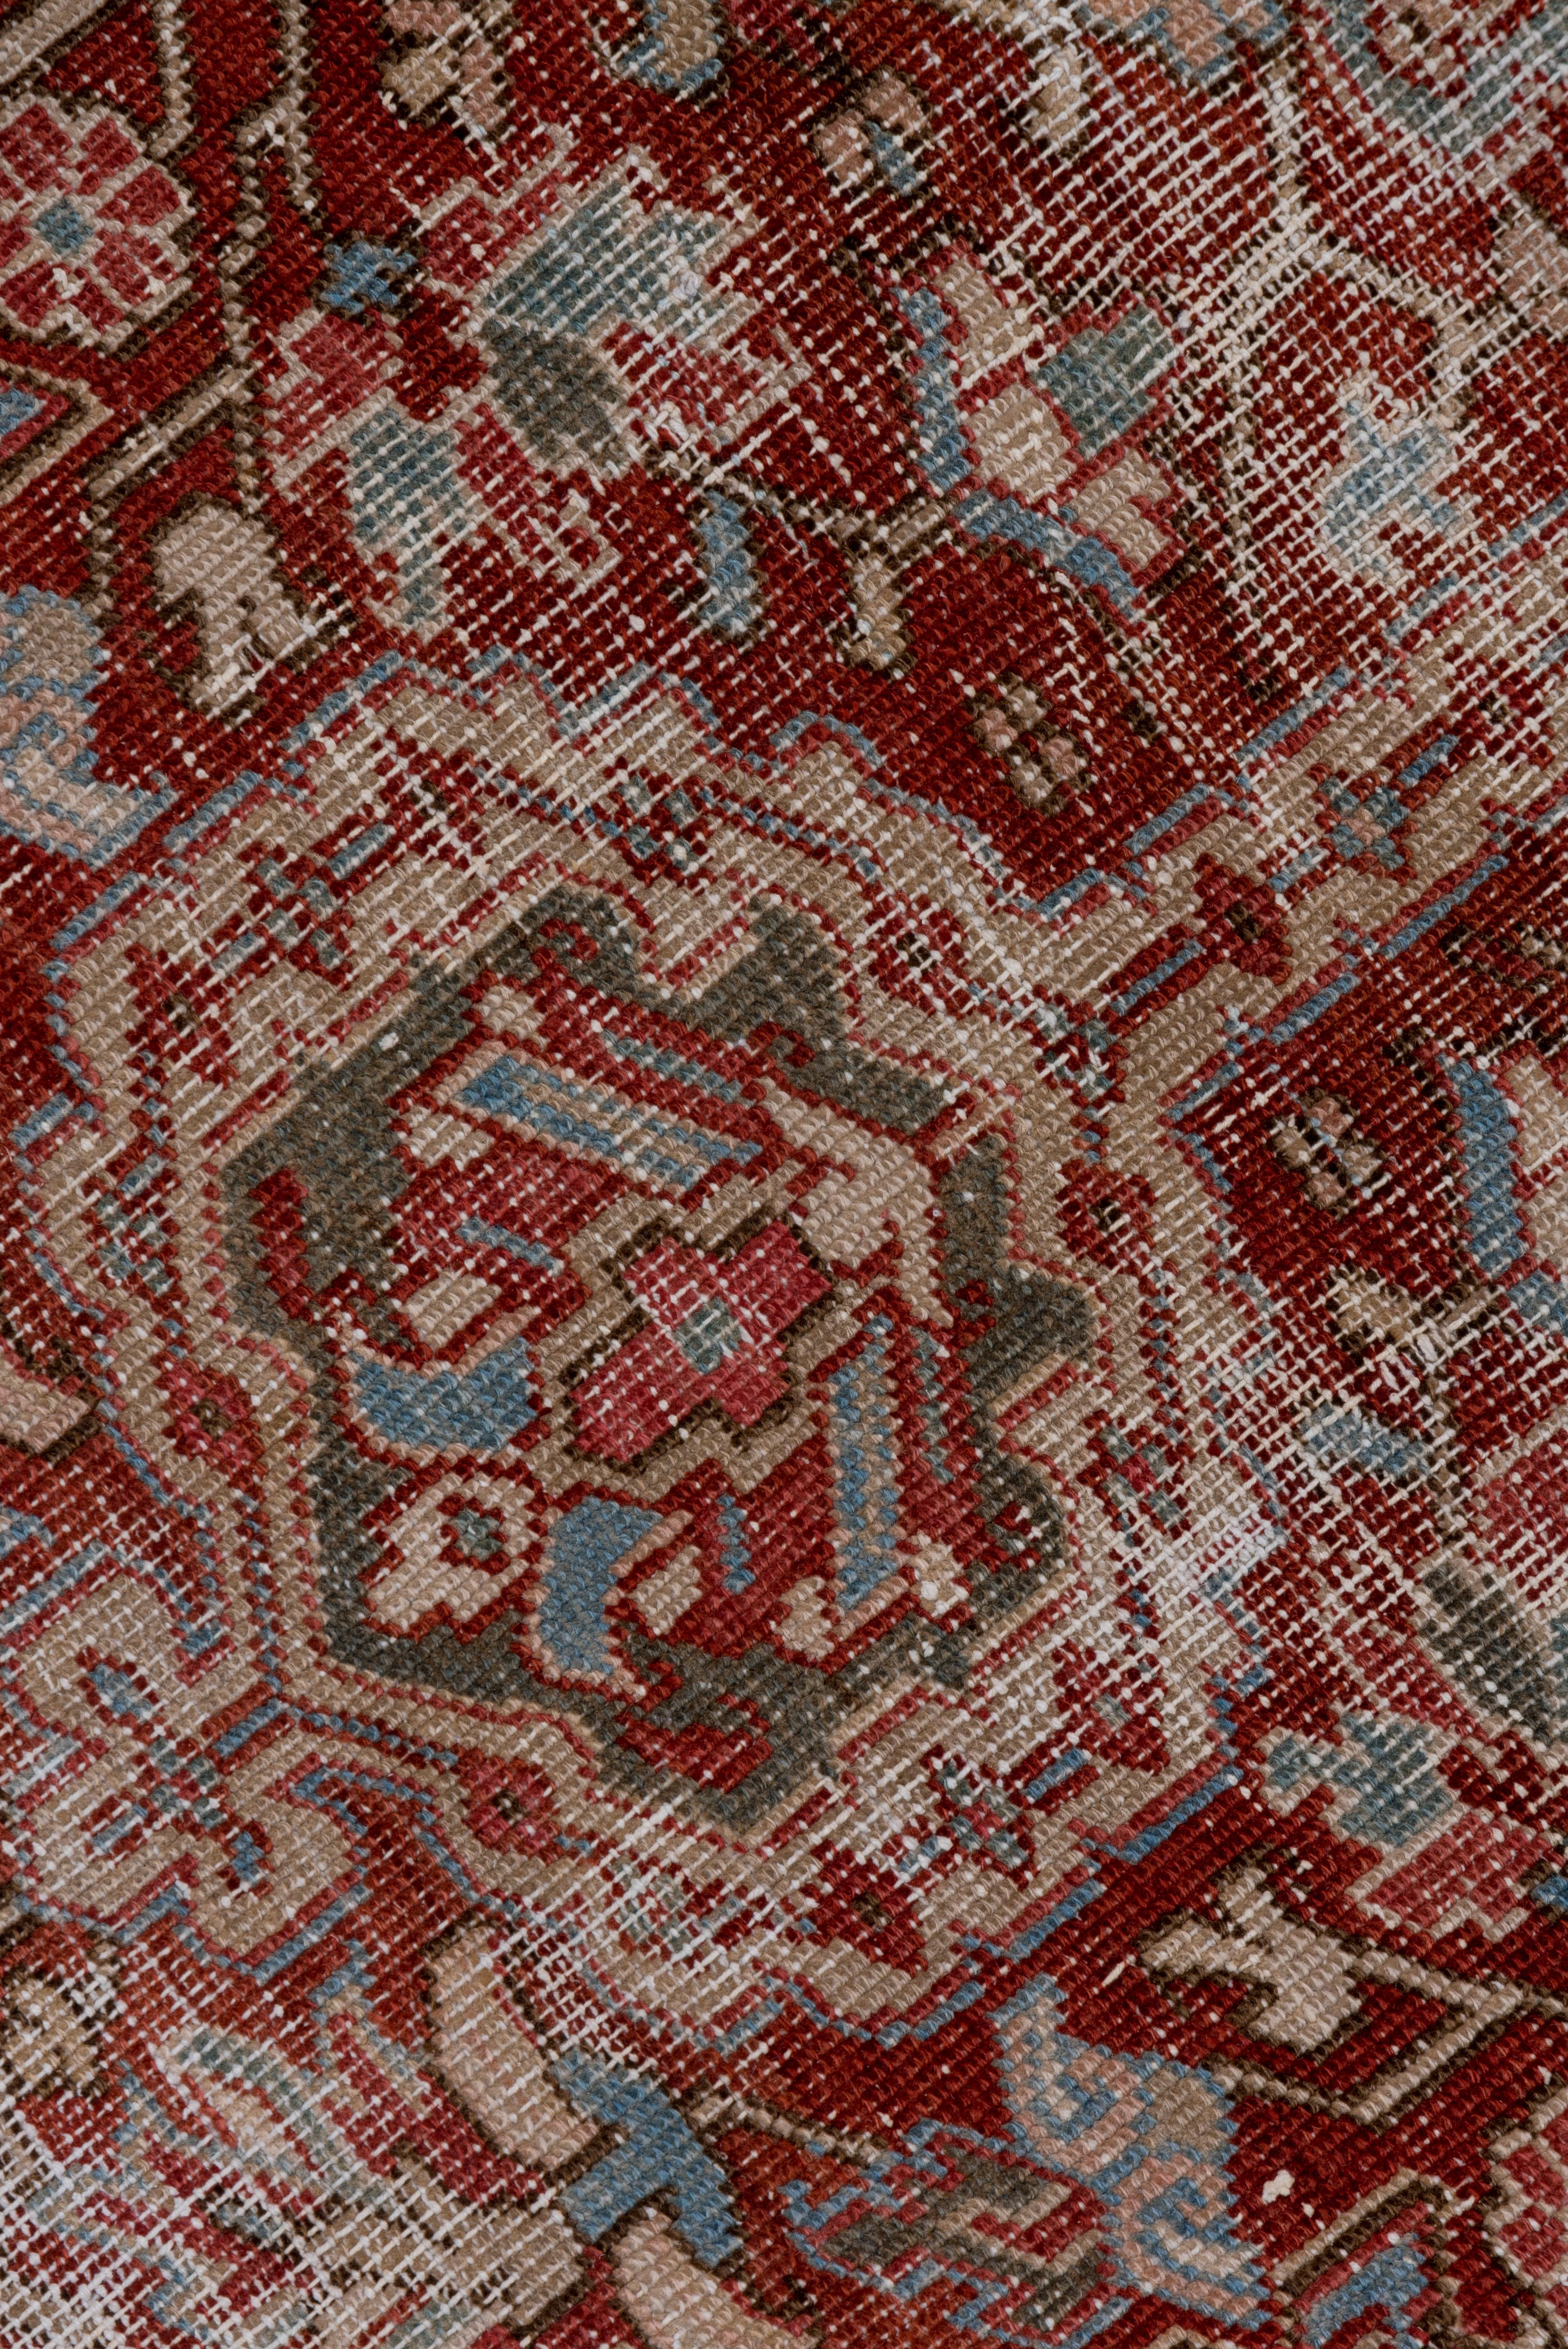 Colorful Lightly Distressed Antique Persian Heriz Rug, Red Field, Green Borders In Good Condition For Sale In New York, NY